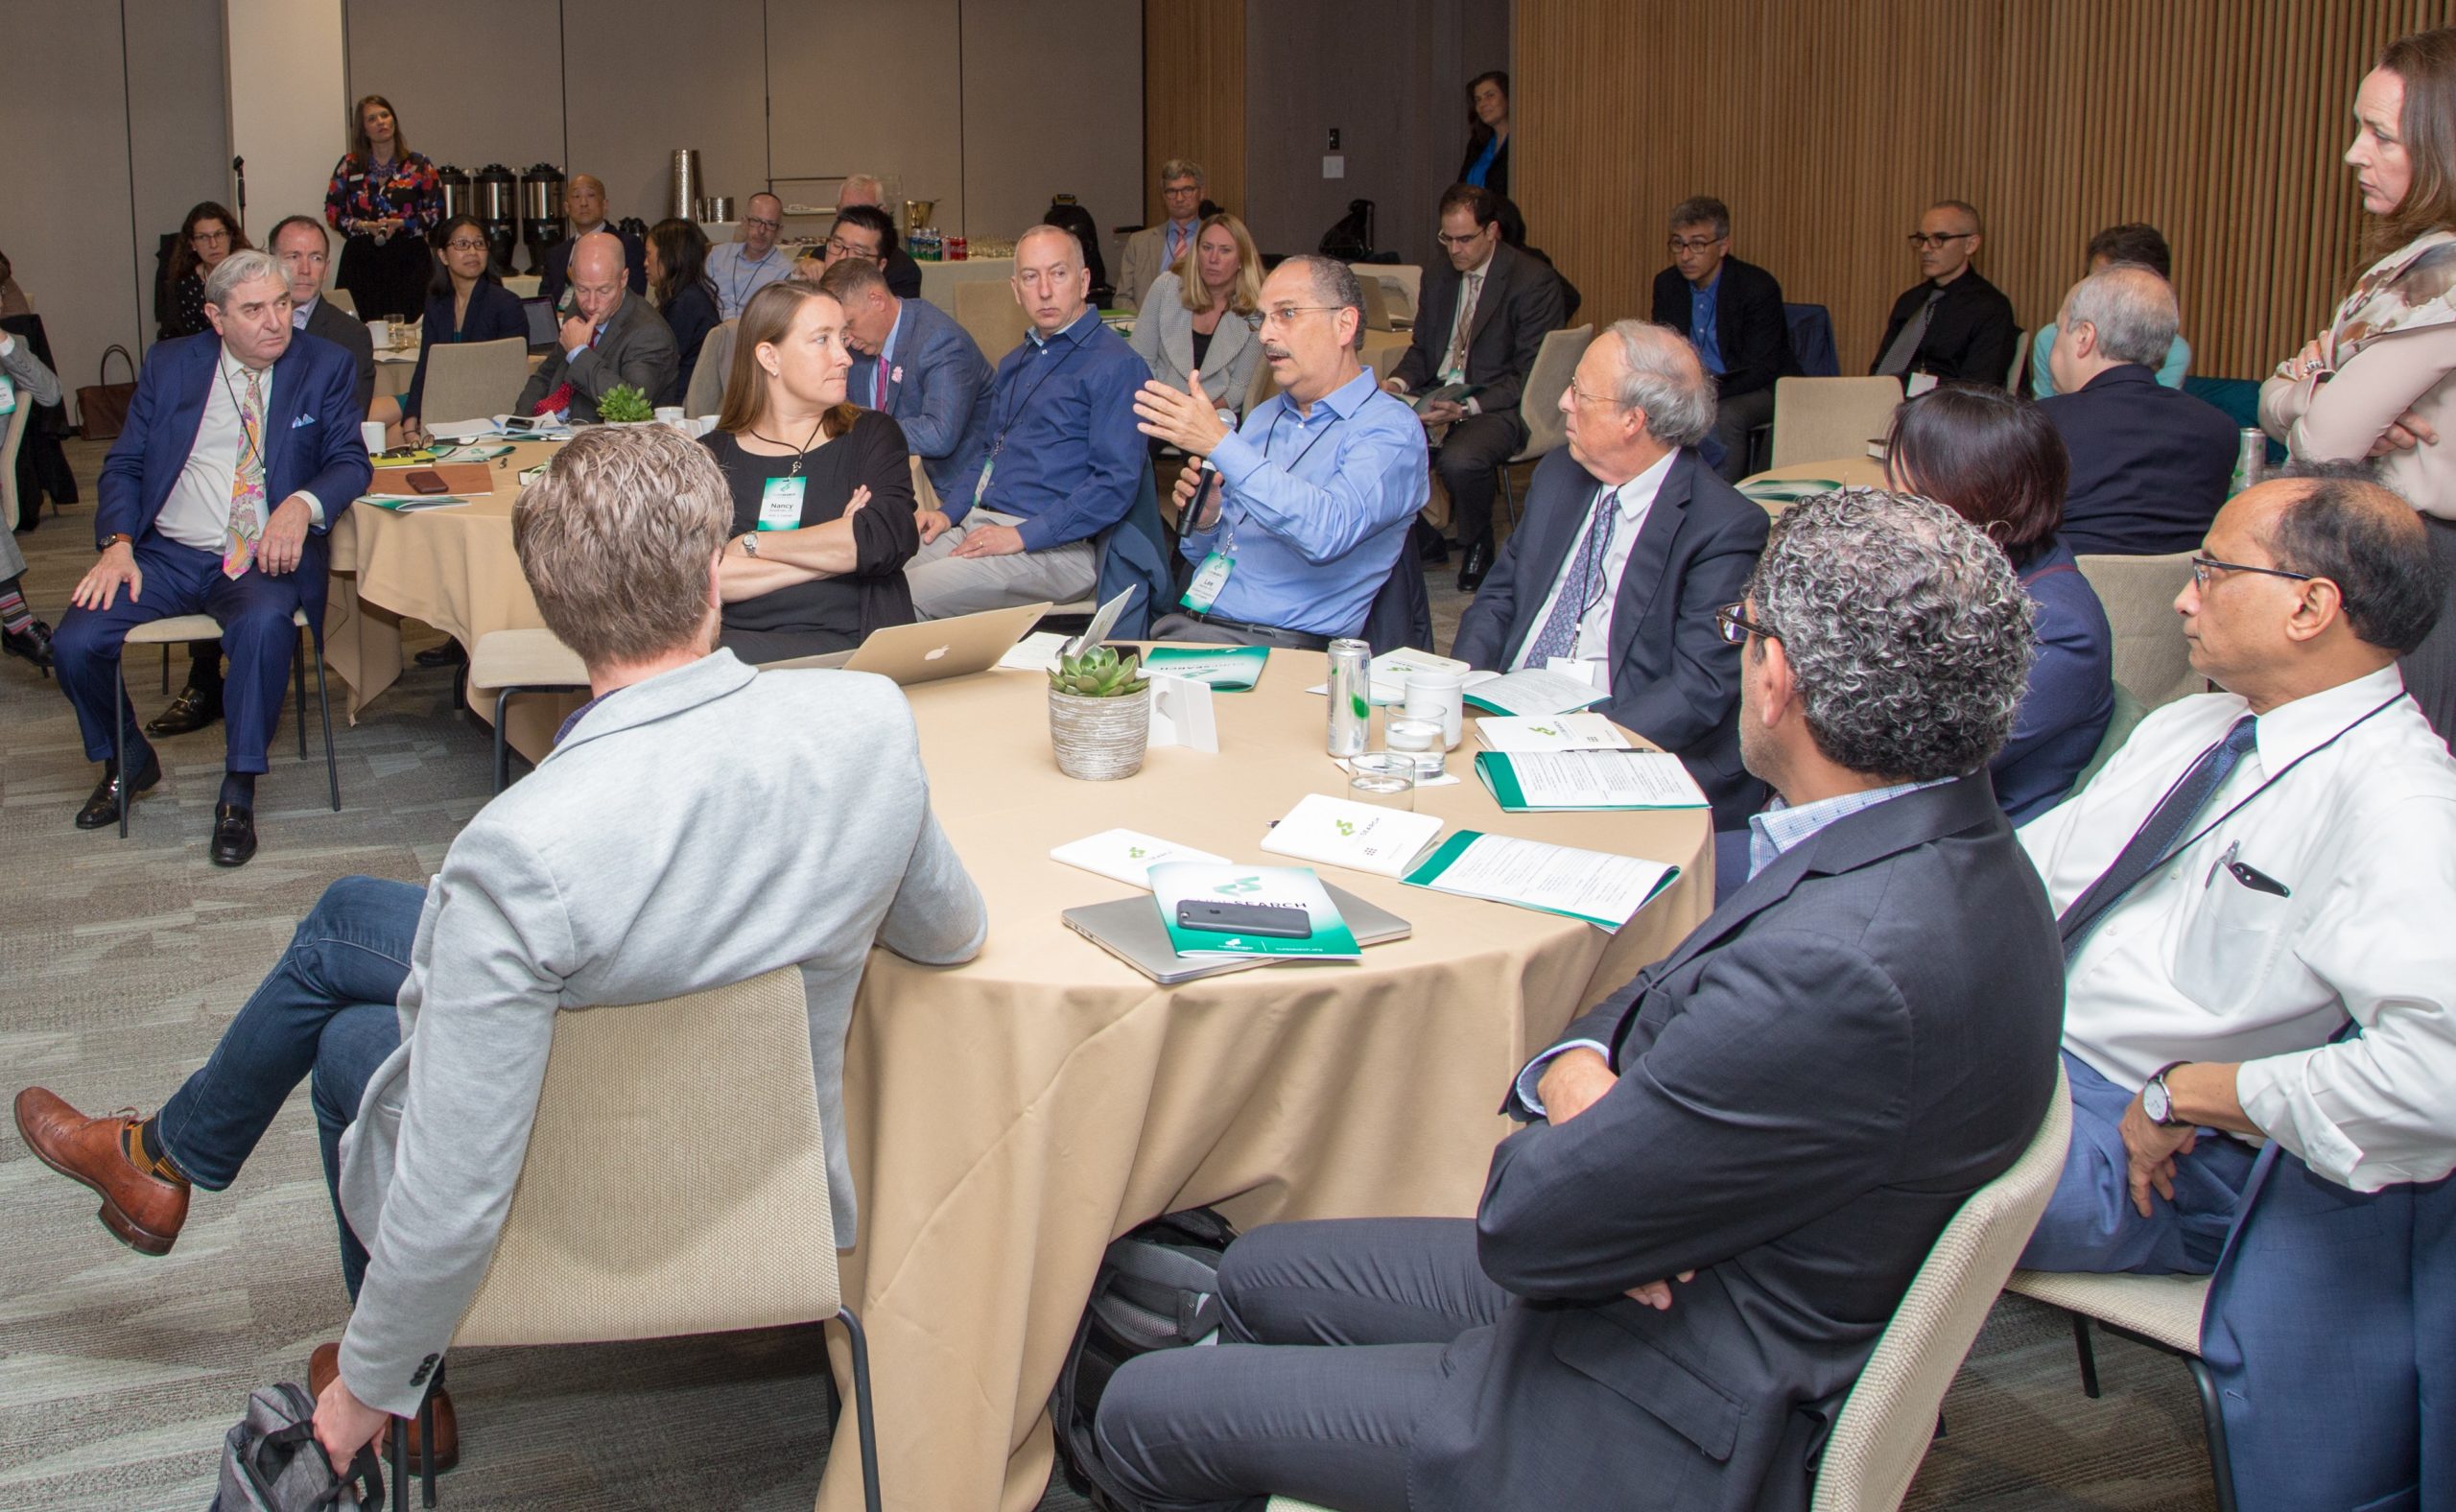 Photo from 2019 CureSearch Summit in Boston